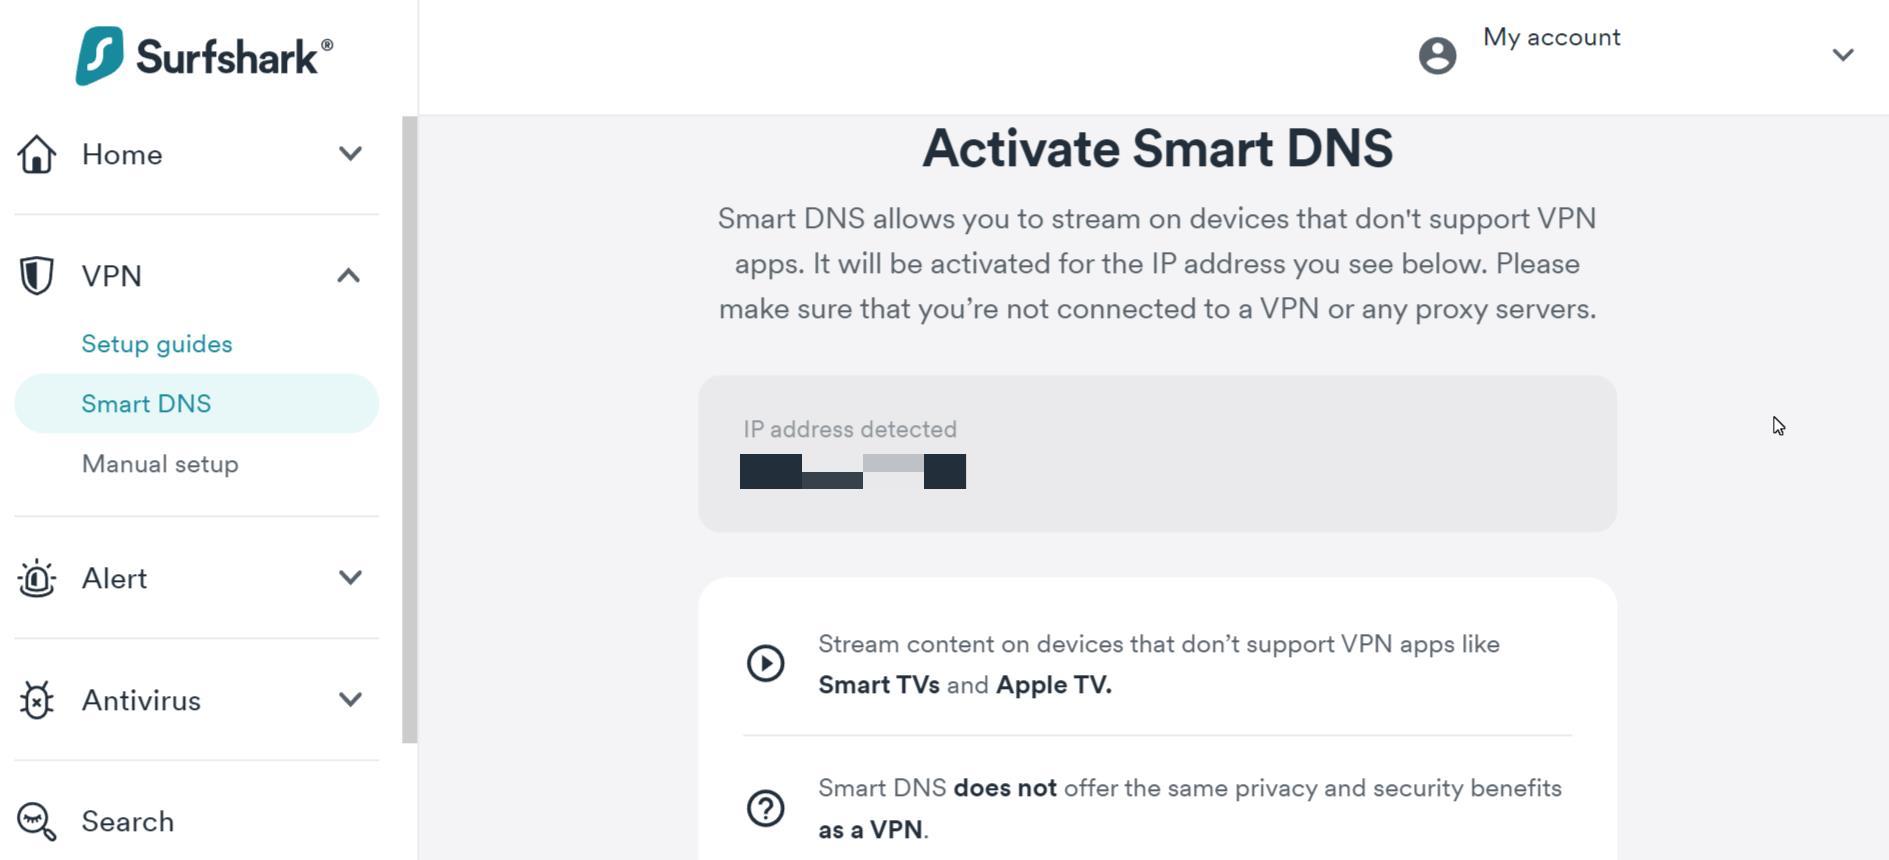 A screenshot of our Surfshark account with the option to activate Smart DNS, which allows you to stream on devices that don't support a VPN.